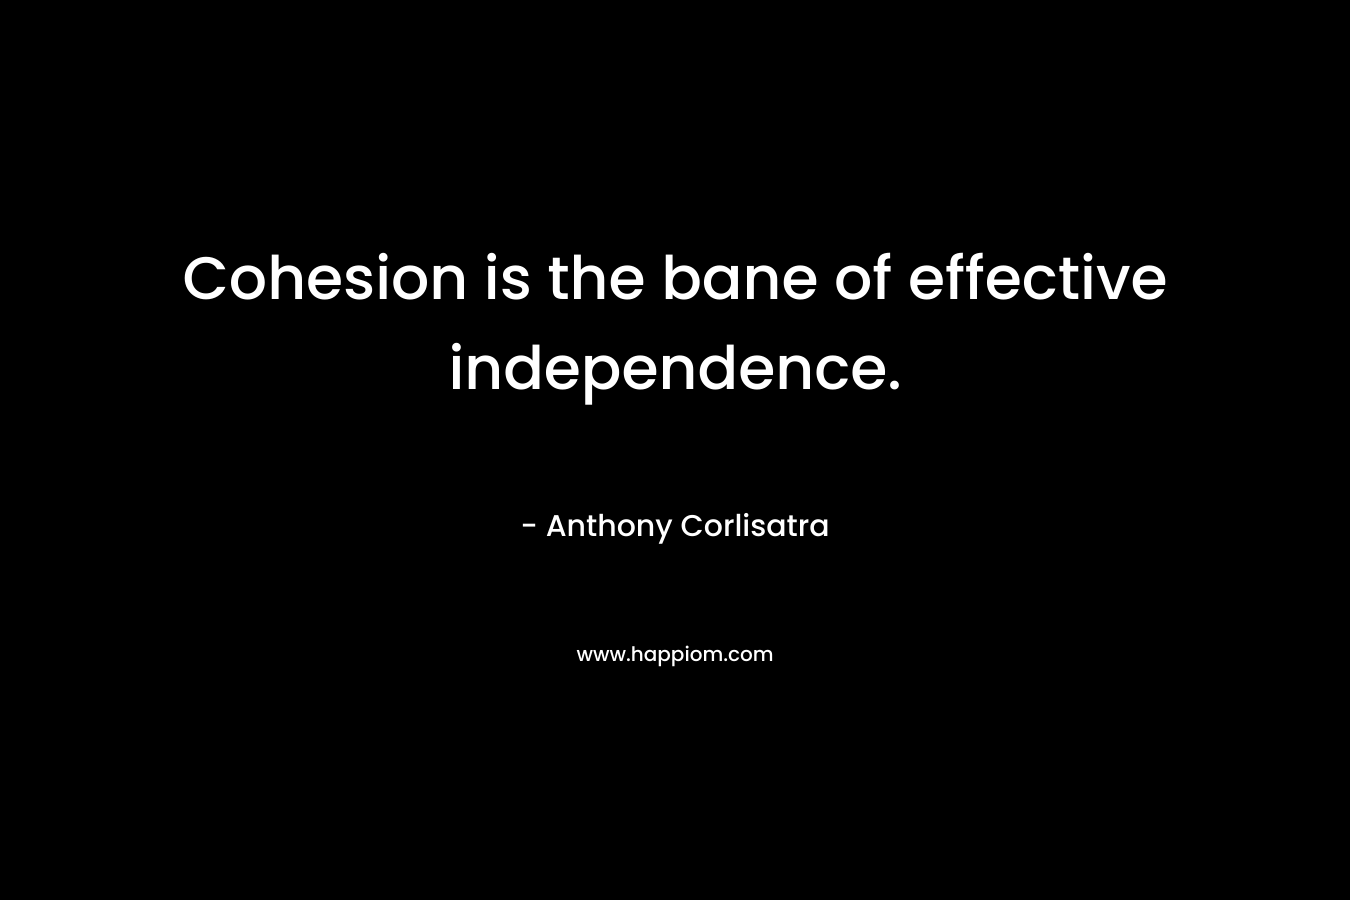 Cohesion is the bane of effective independence.